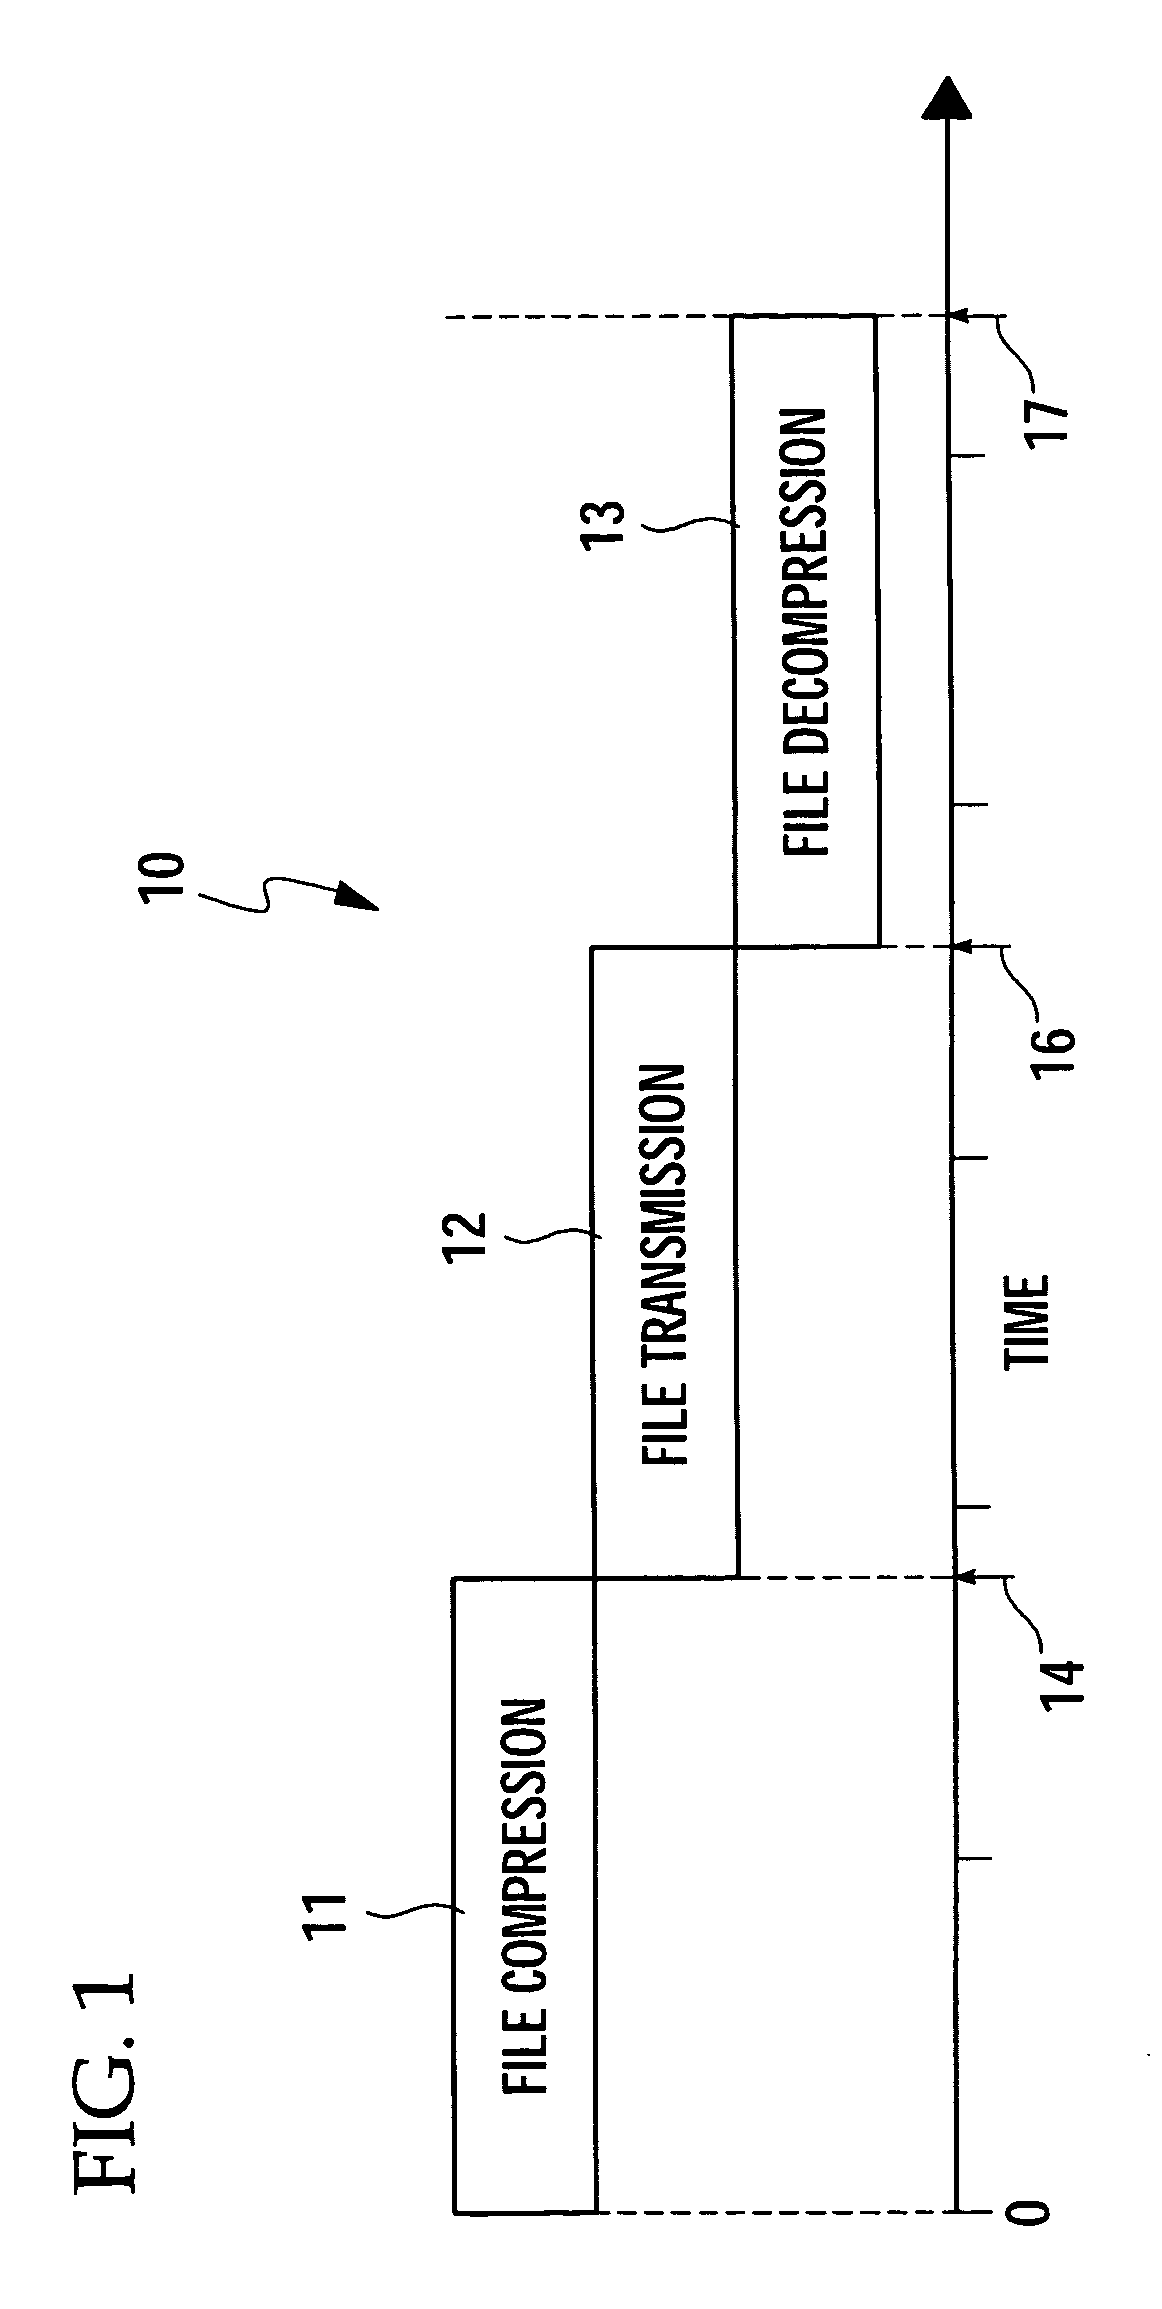 Apparatus and method for efficiently and securely transferring files over a communications network